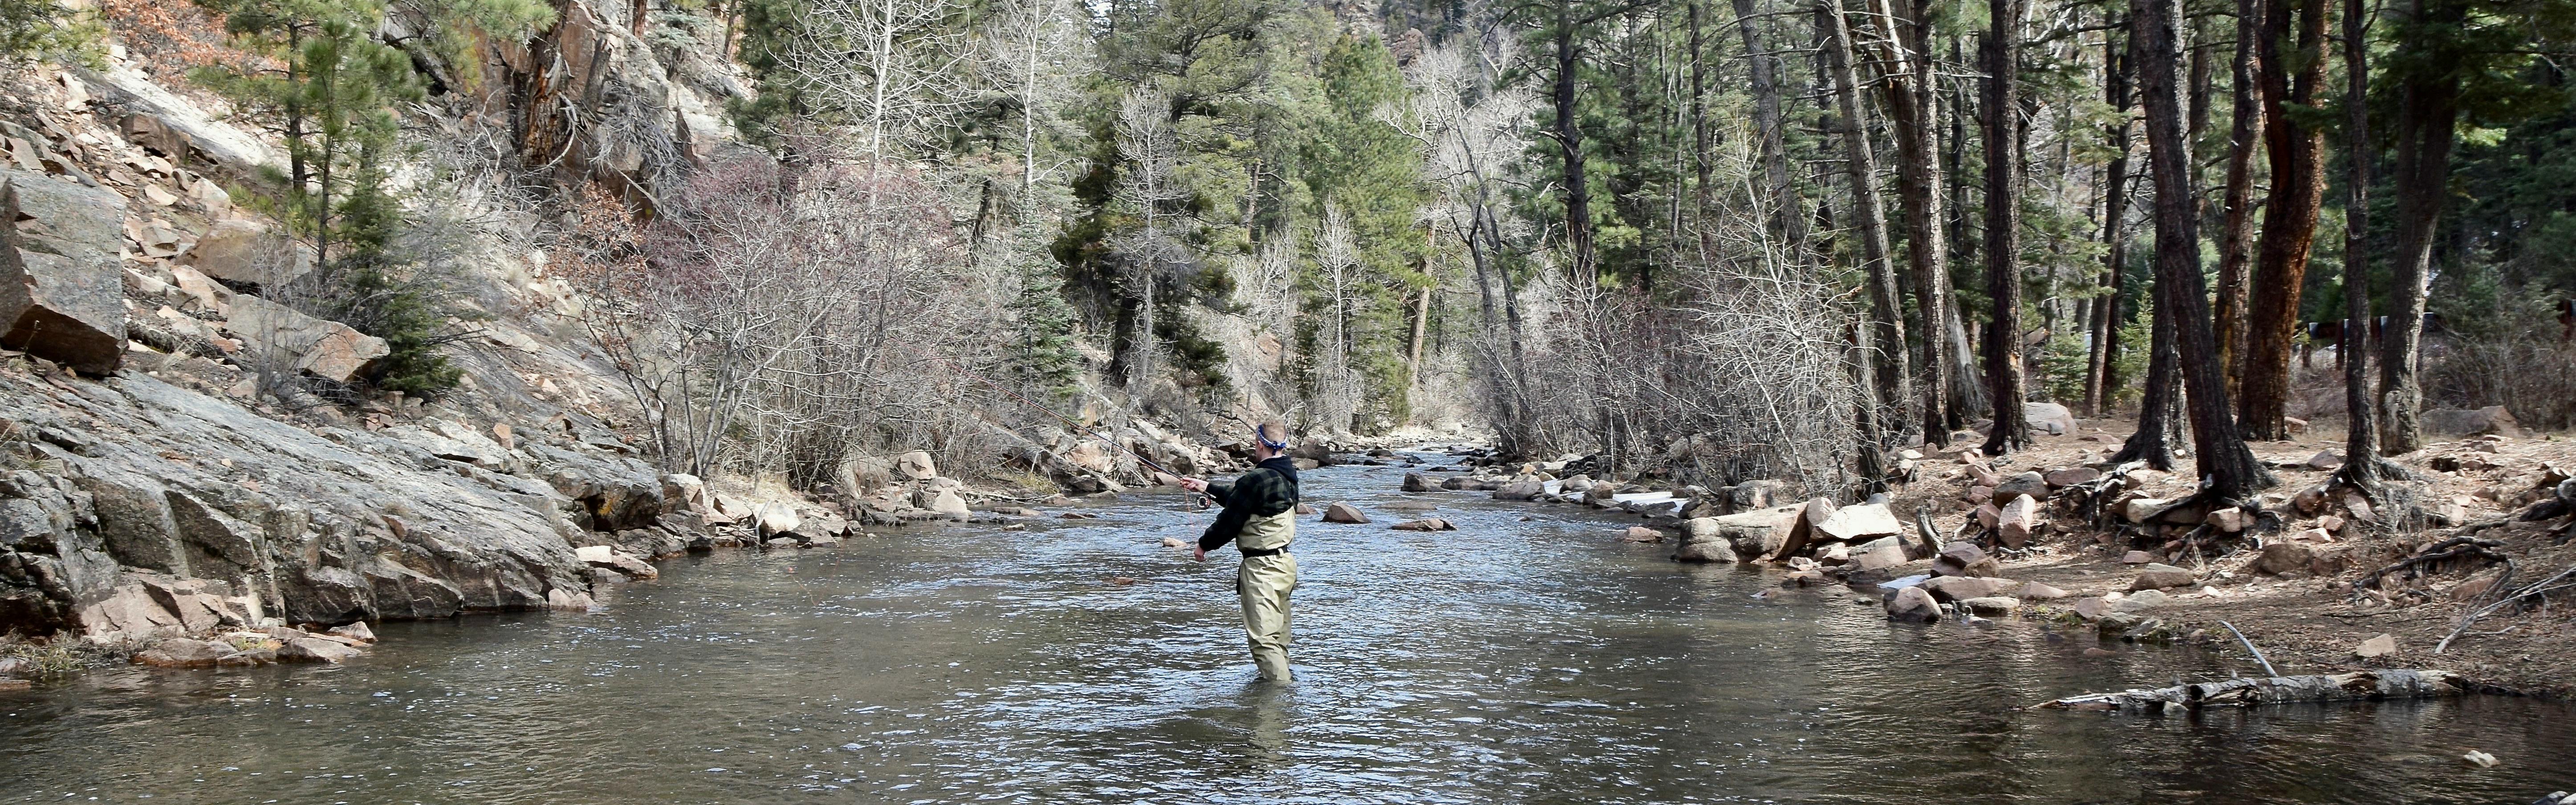 A man flyfishes in the middle of the river while wearing waders. The banks are sloped and rocky. 